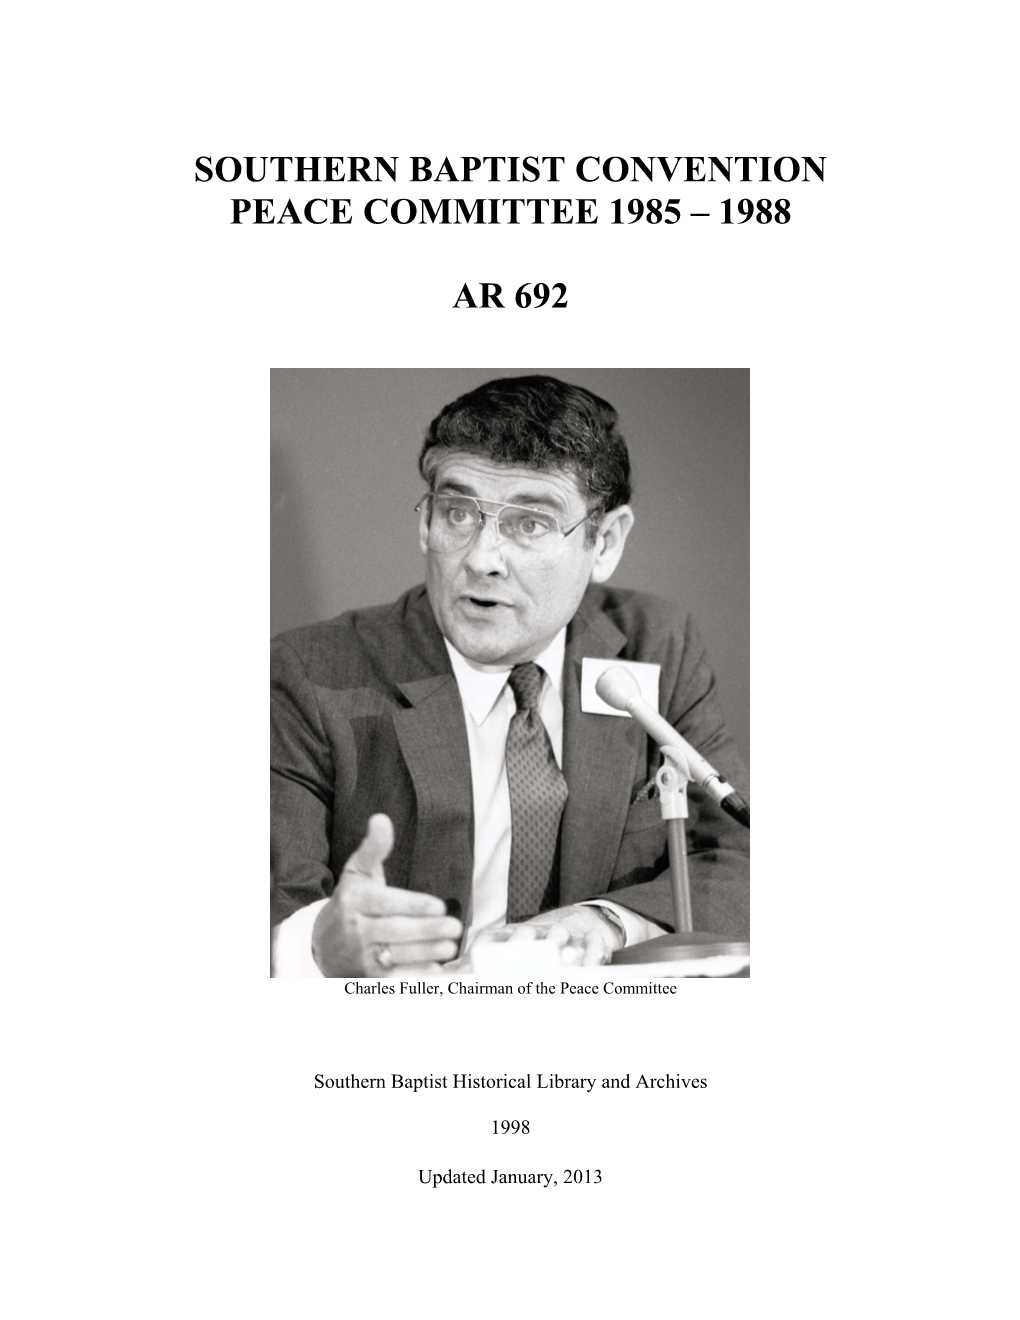 Southern Baptist Convention Peace Committee Documents